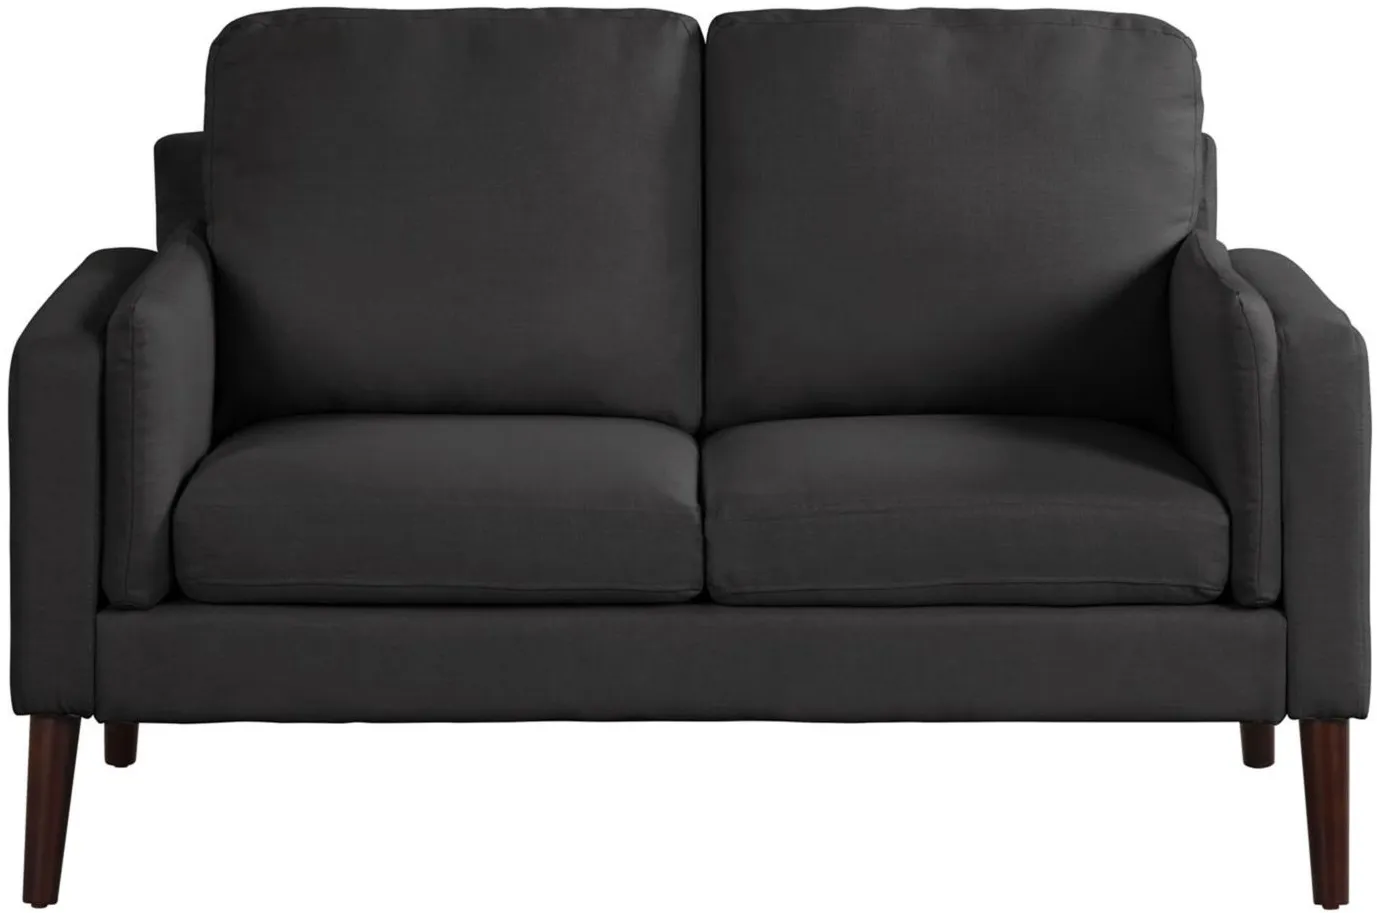 Nashville Loveseat in Black by Lifestyle Solutions